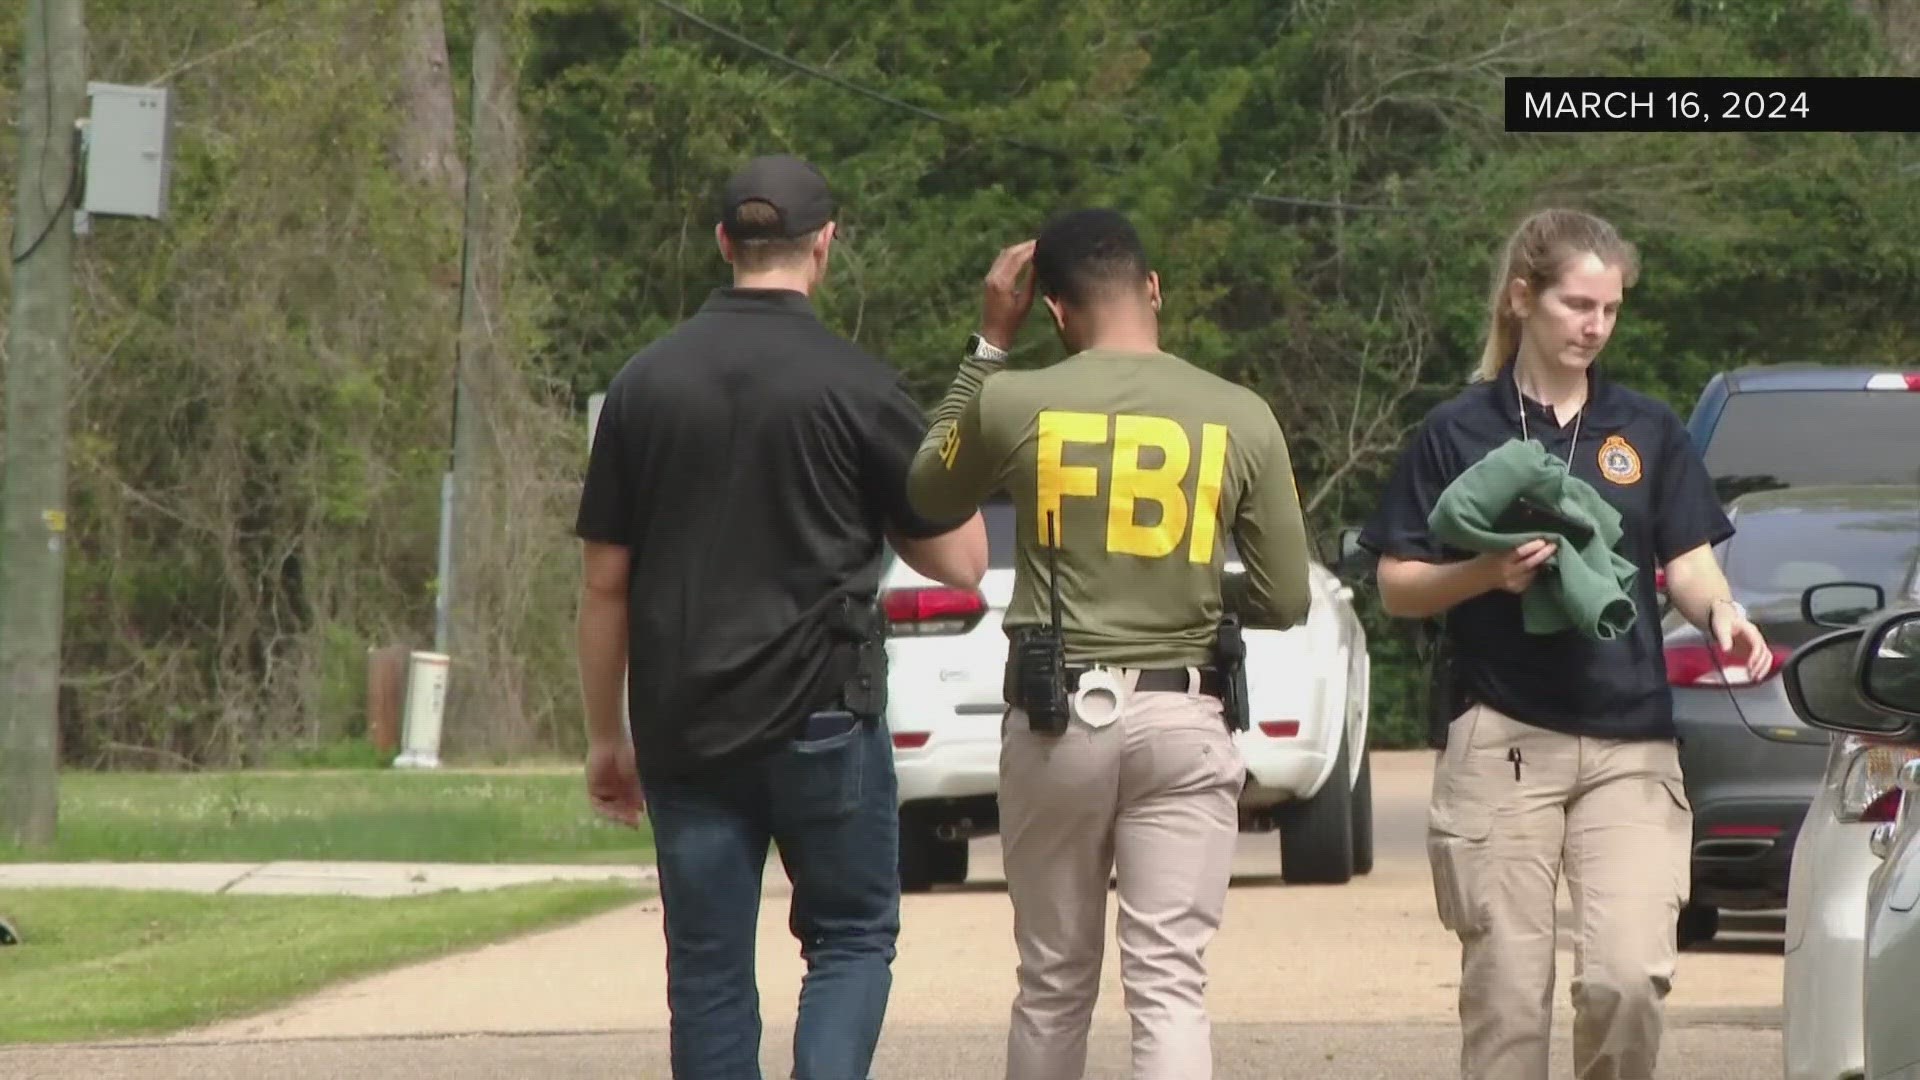 A Madisonville man was arrested after an FBI raid of his home showed homemade explosives.